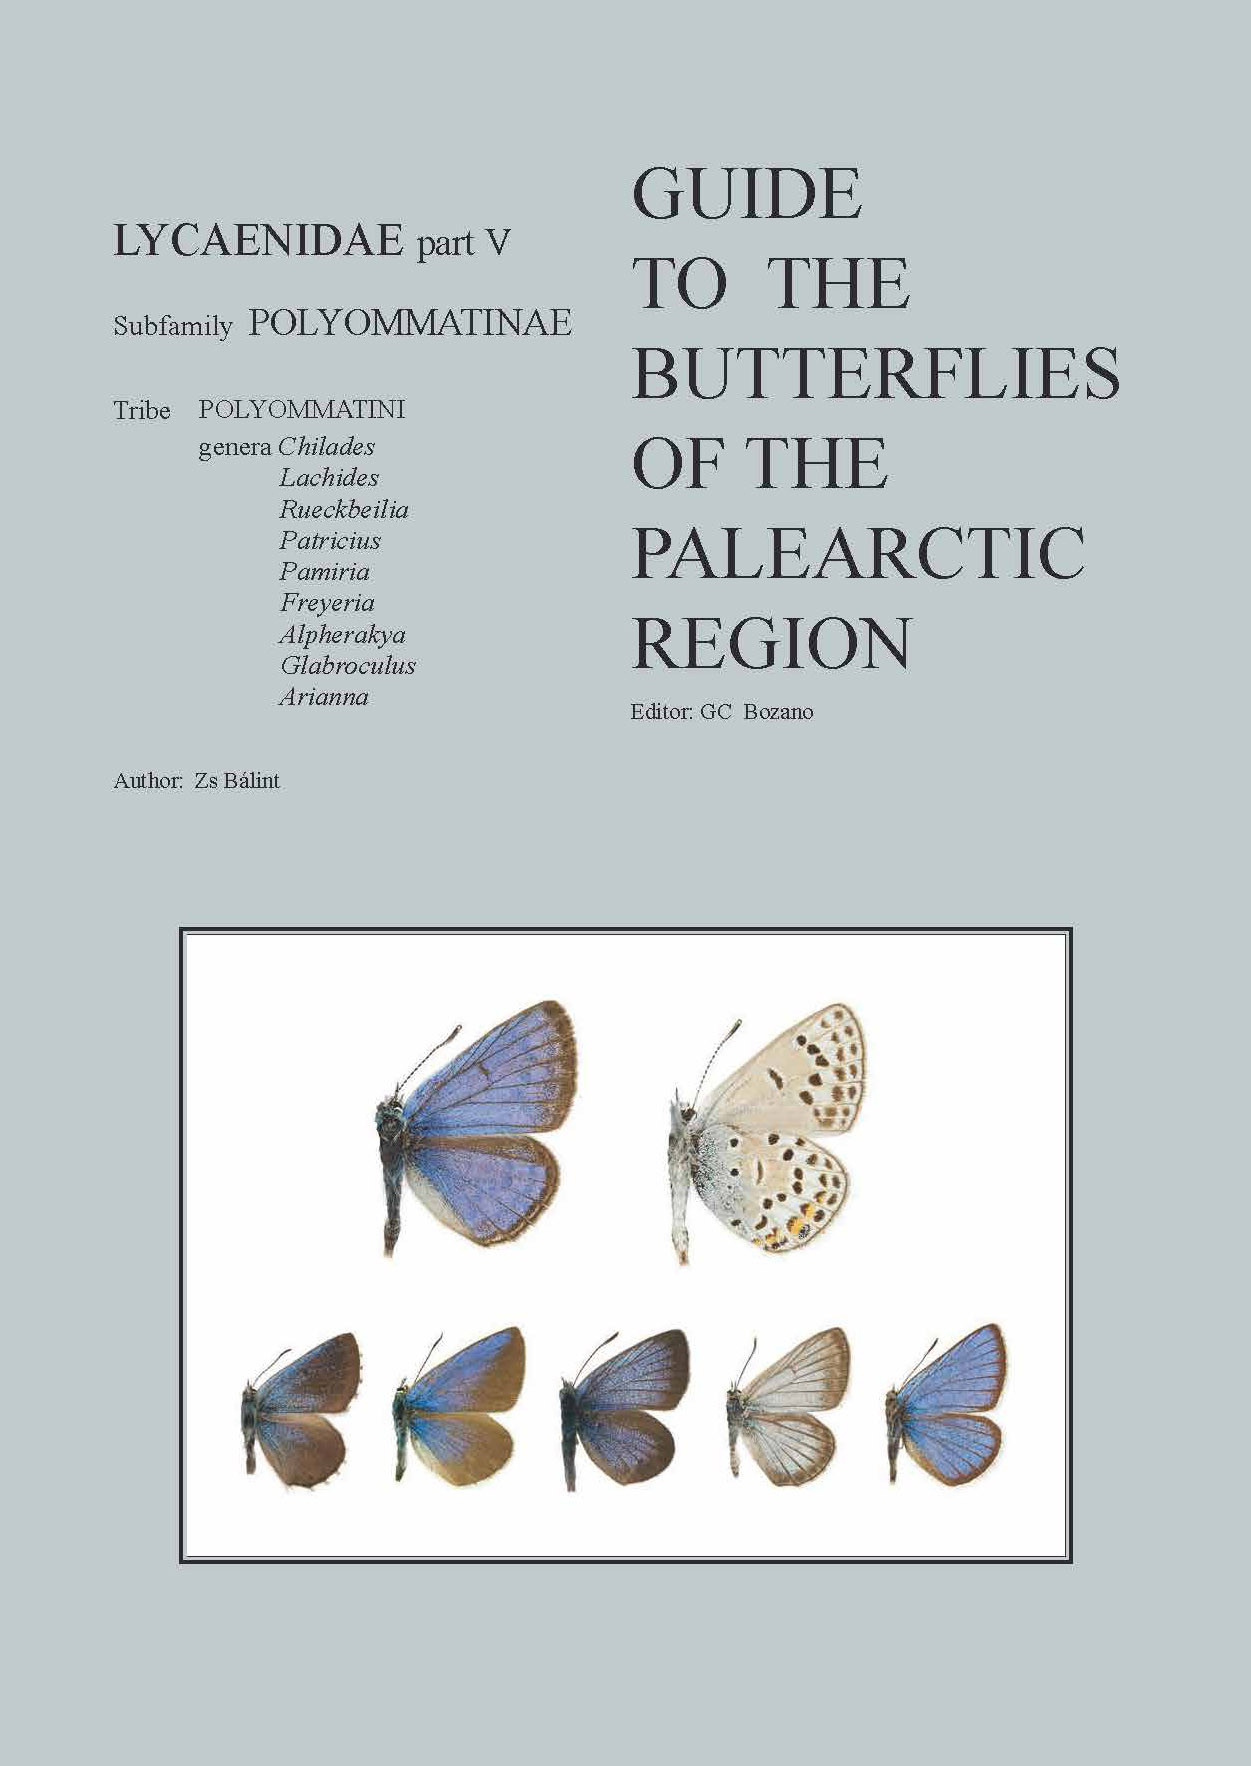 GUIDE TO THE BUTTERFLIES OF THE PALEARCTIC REGION LYCAENIDAE PART V